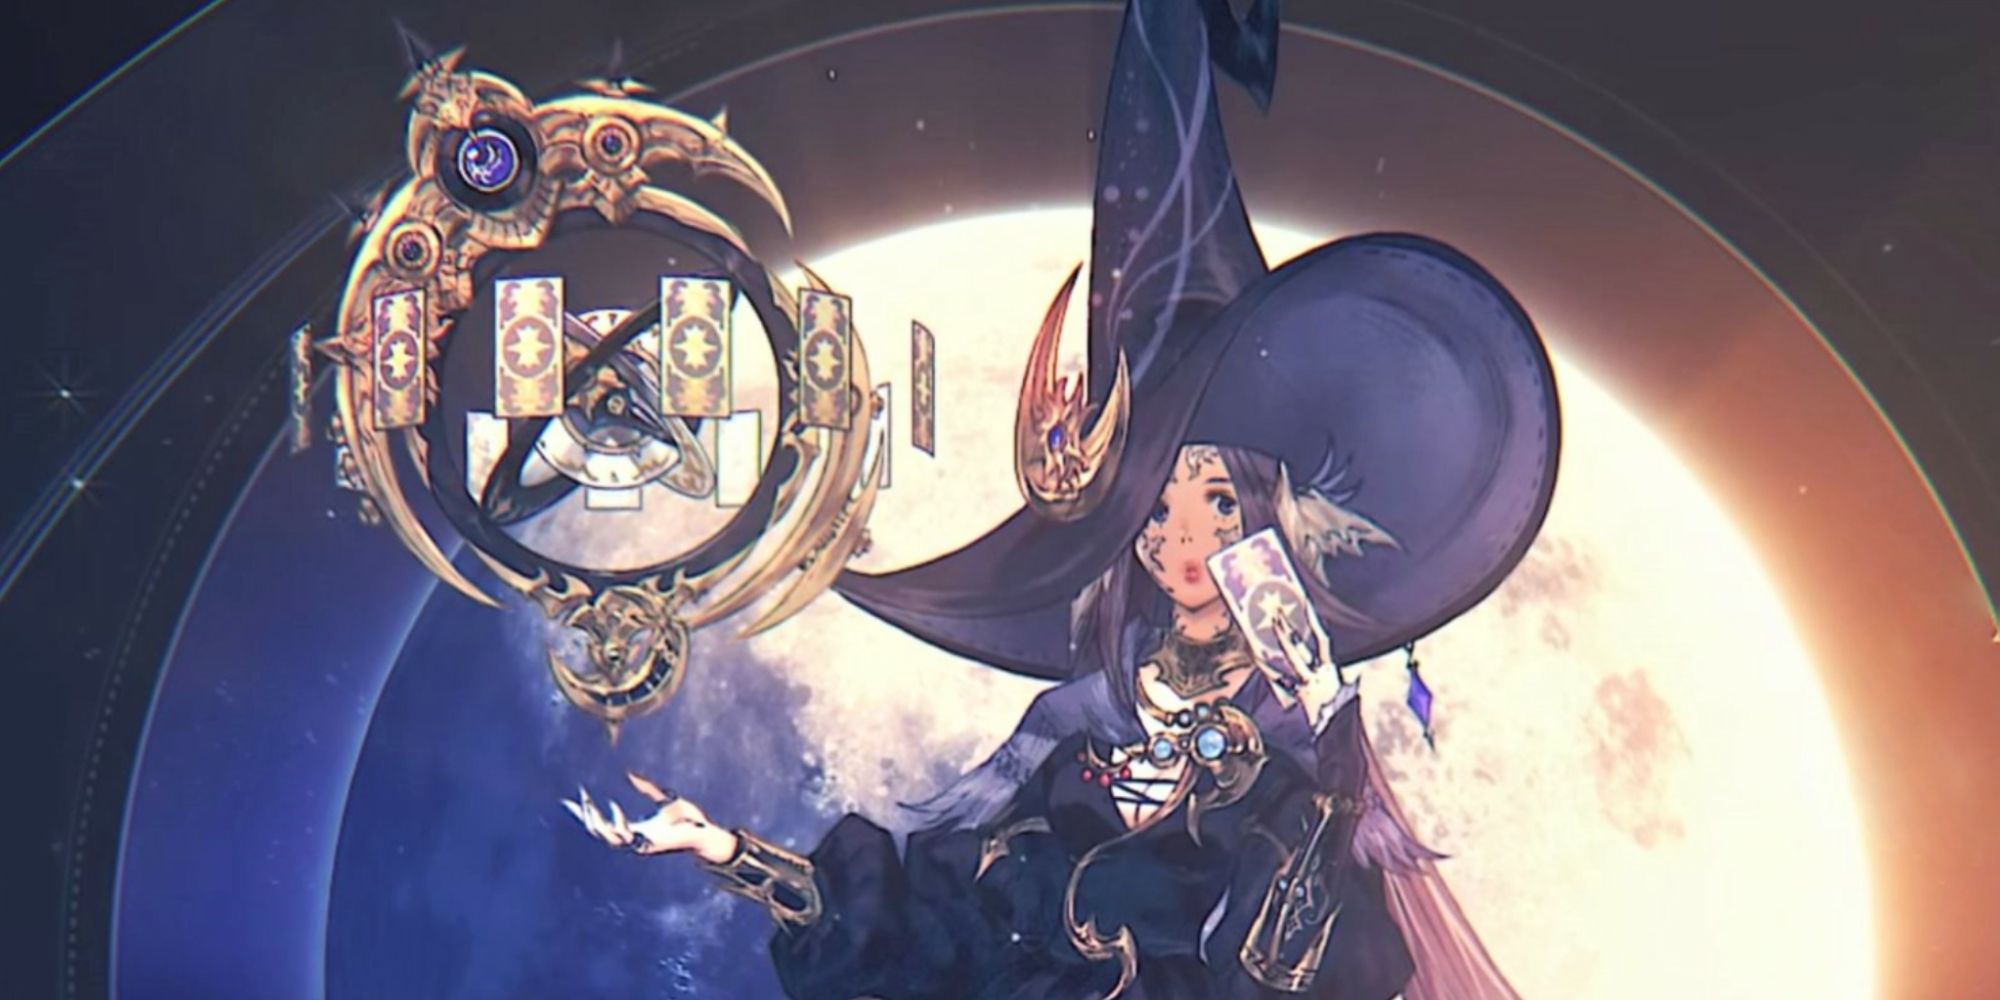 An astrologian holding up a wepaon against a moon backdrop